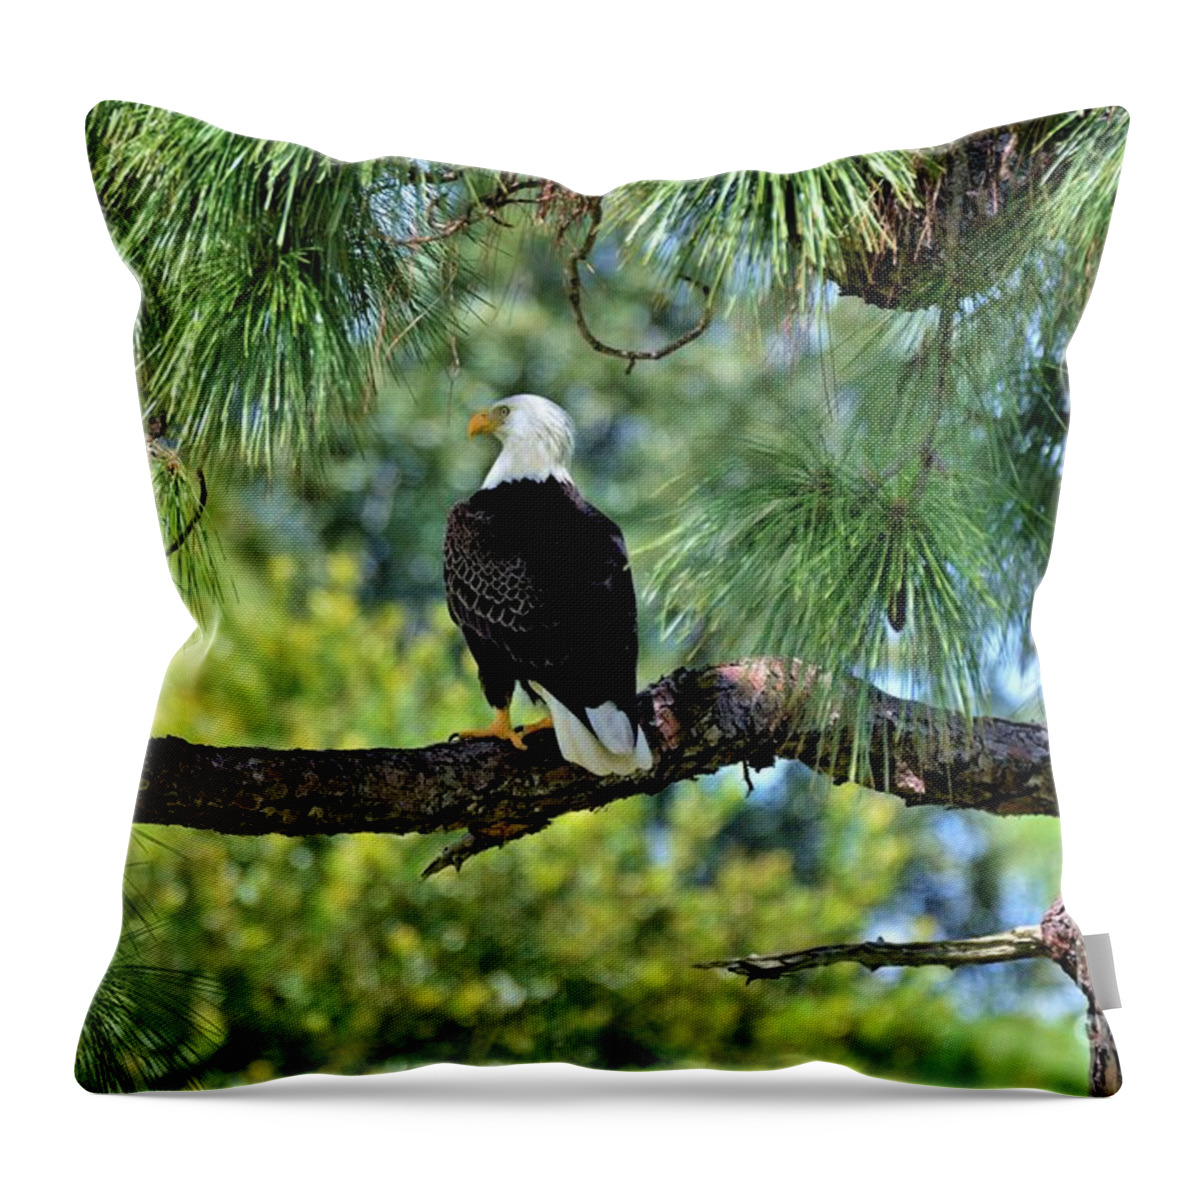 Bald Eagle Throw Pillow featuring the photograph Bald Eagle American Symbol by Julie Adair